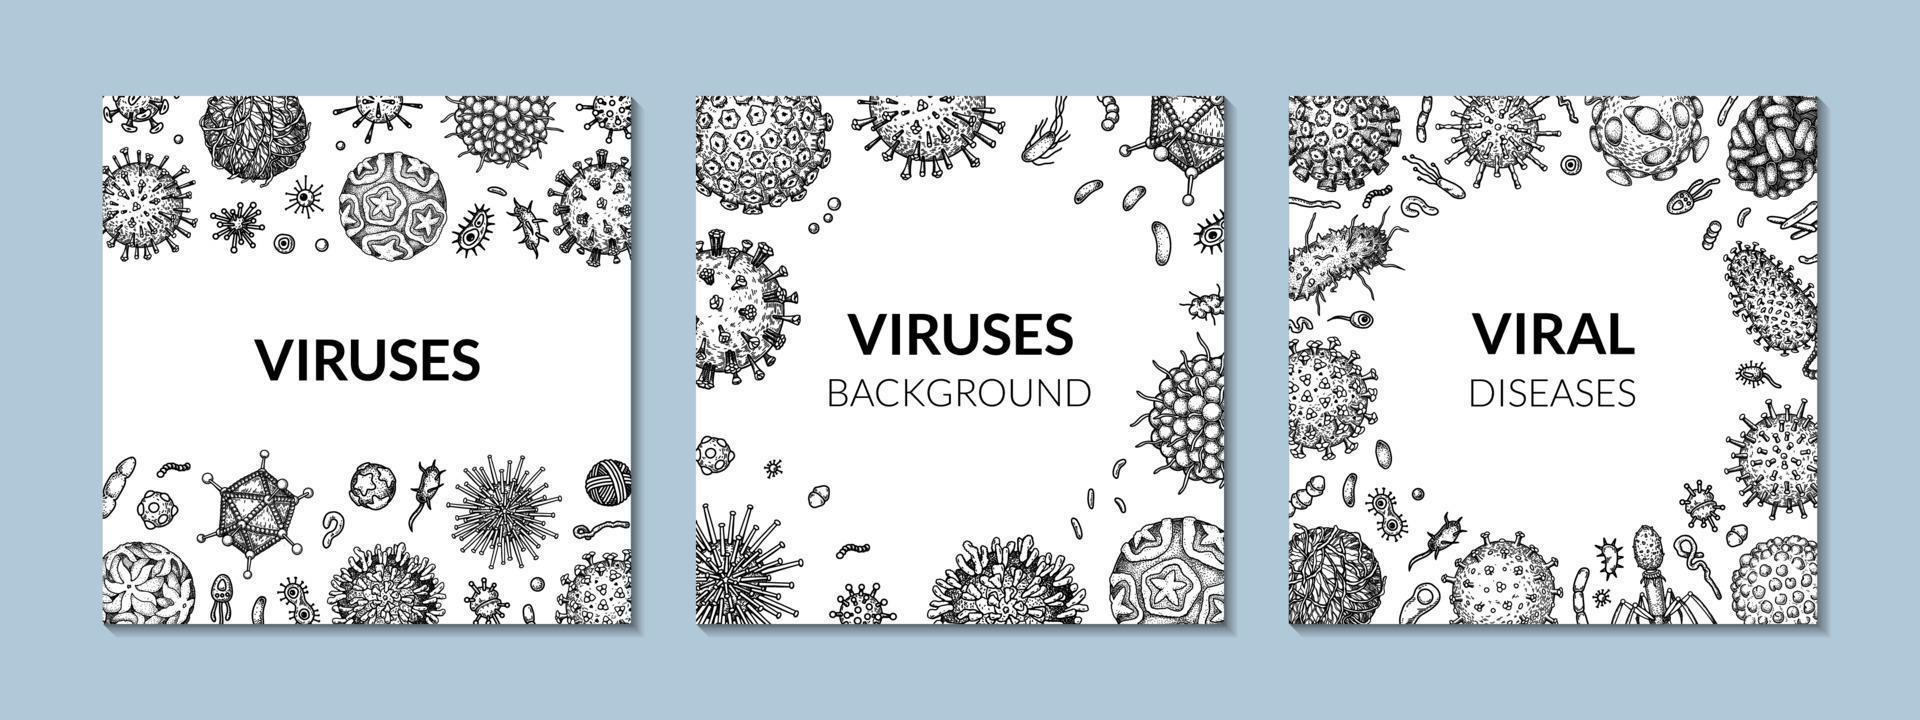 Virus square background in sketch style. Hand drawn bacteria, germ, microorganism. Microbiology scientific design. Vector illustration in sketch style